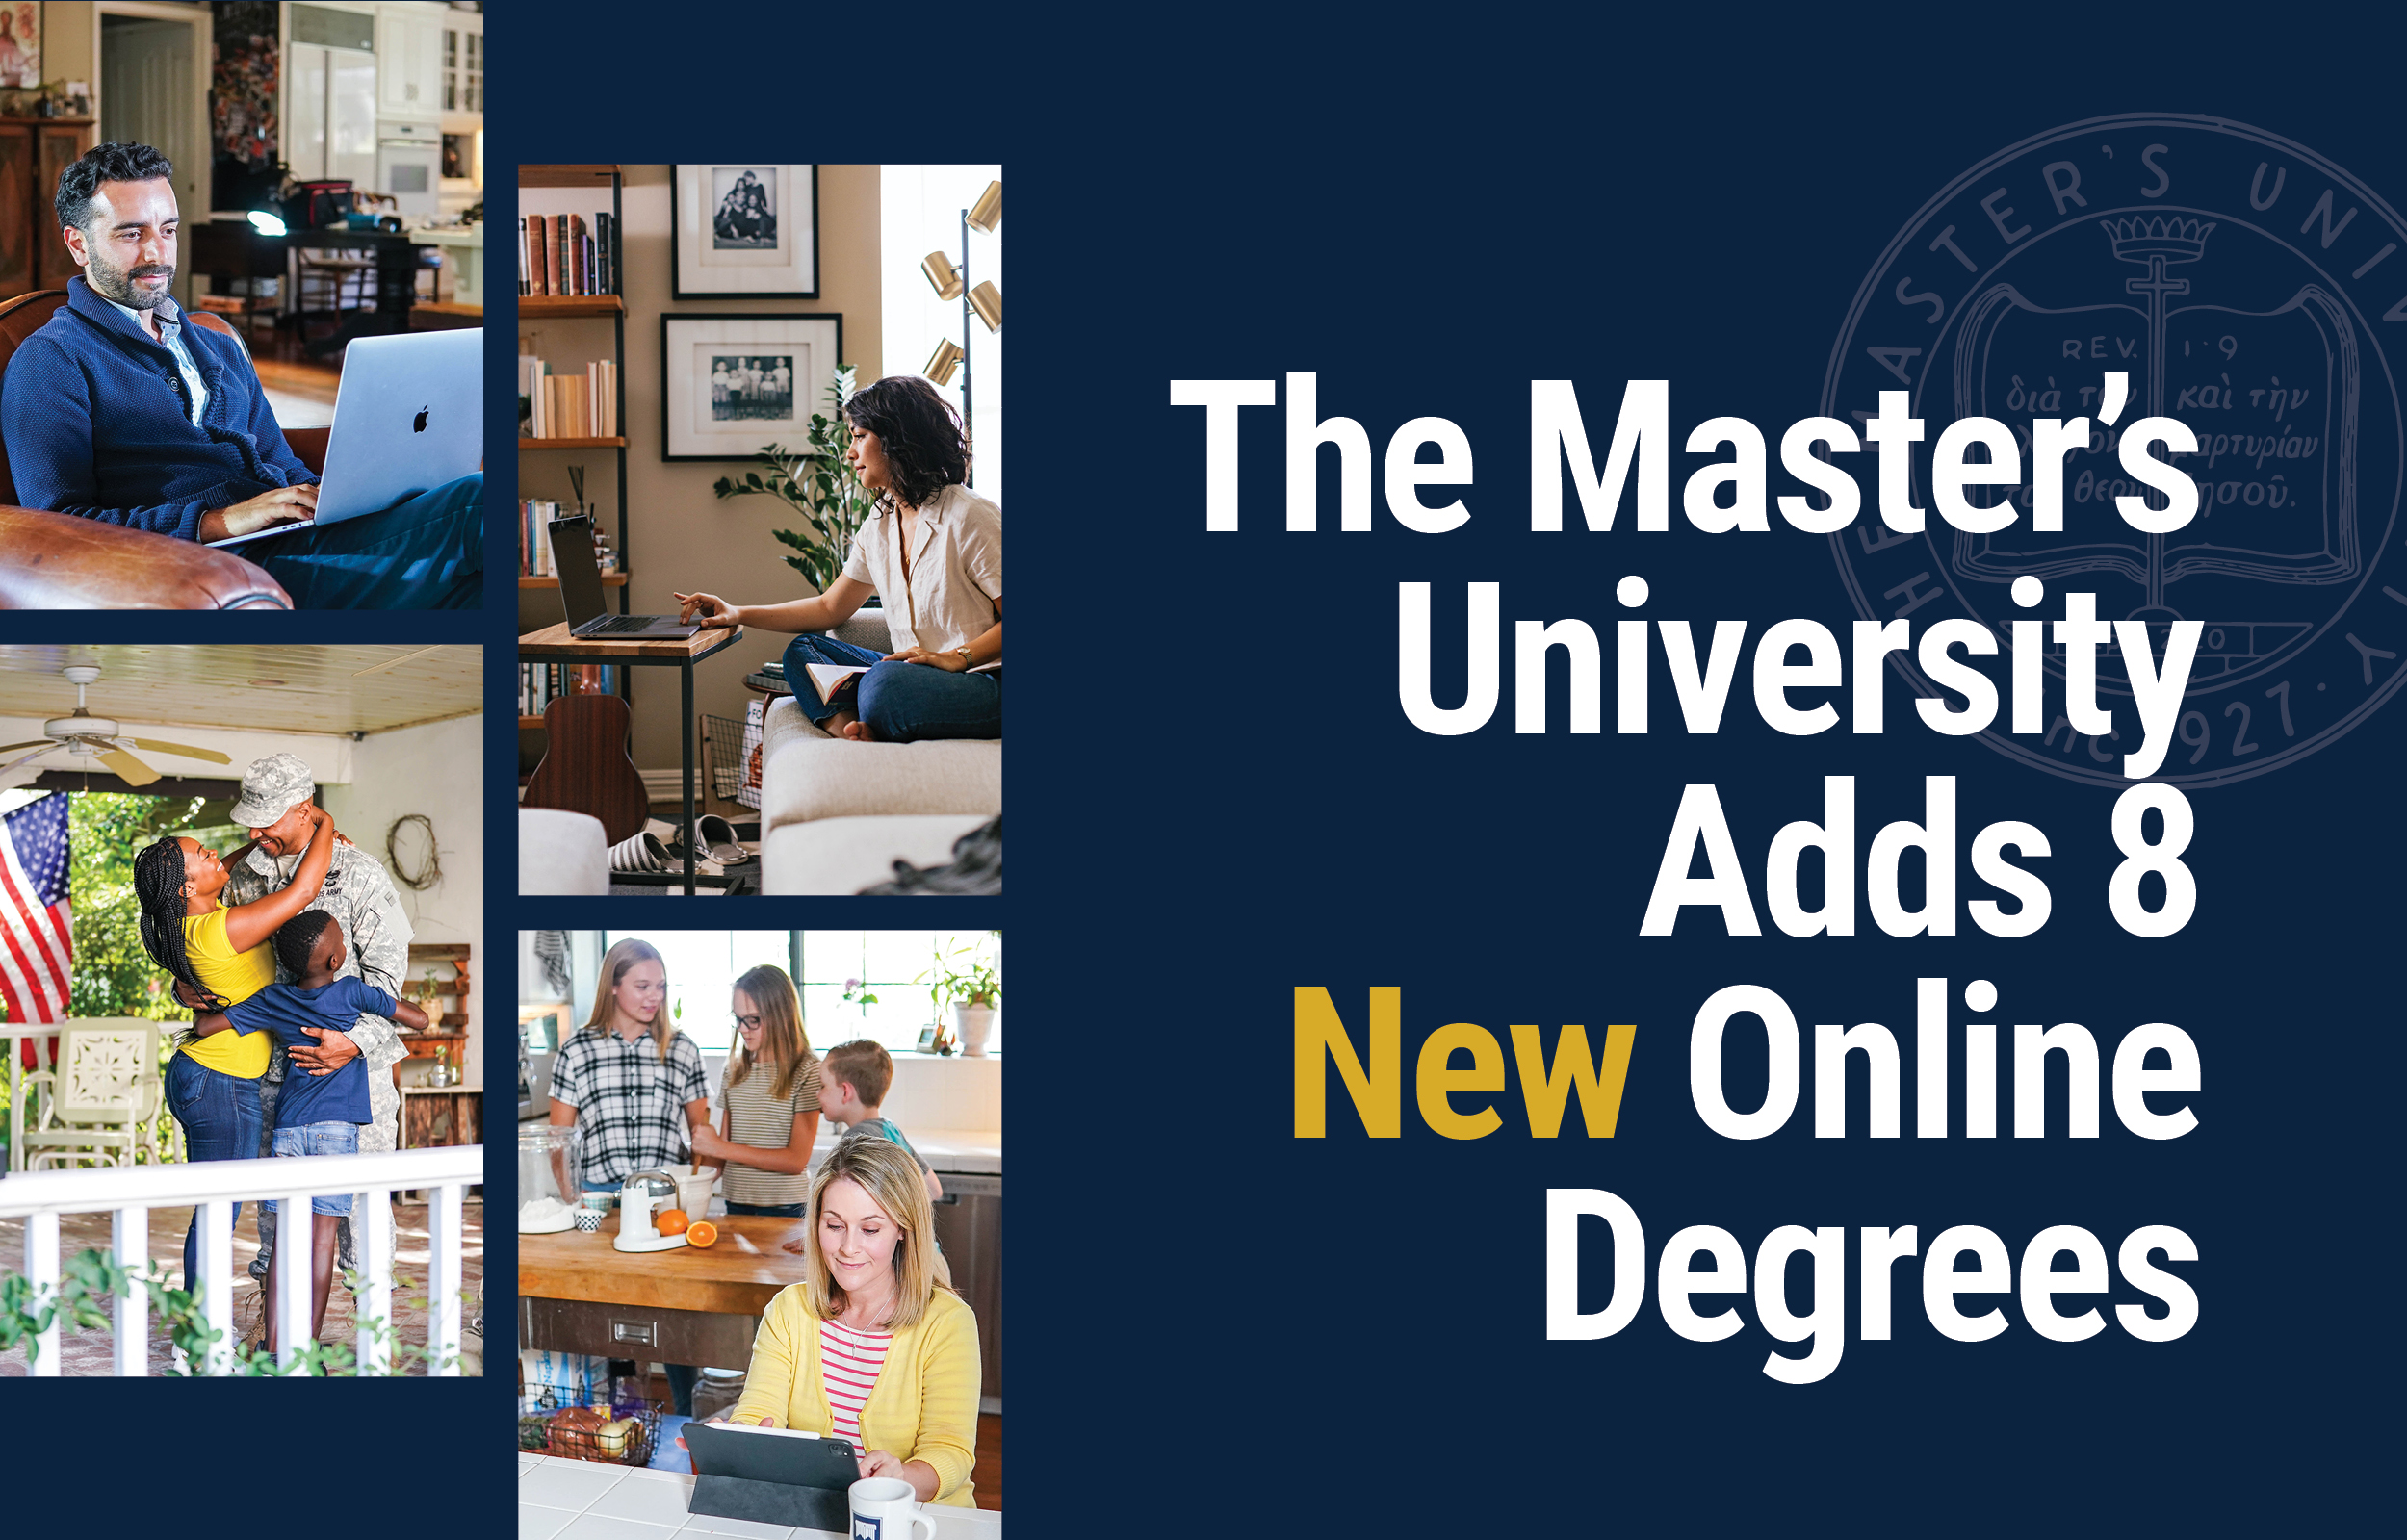 TMU Adds 8 New Online Degrees image